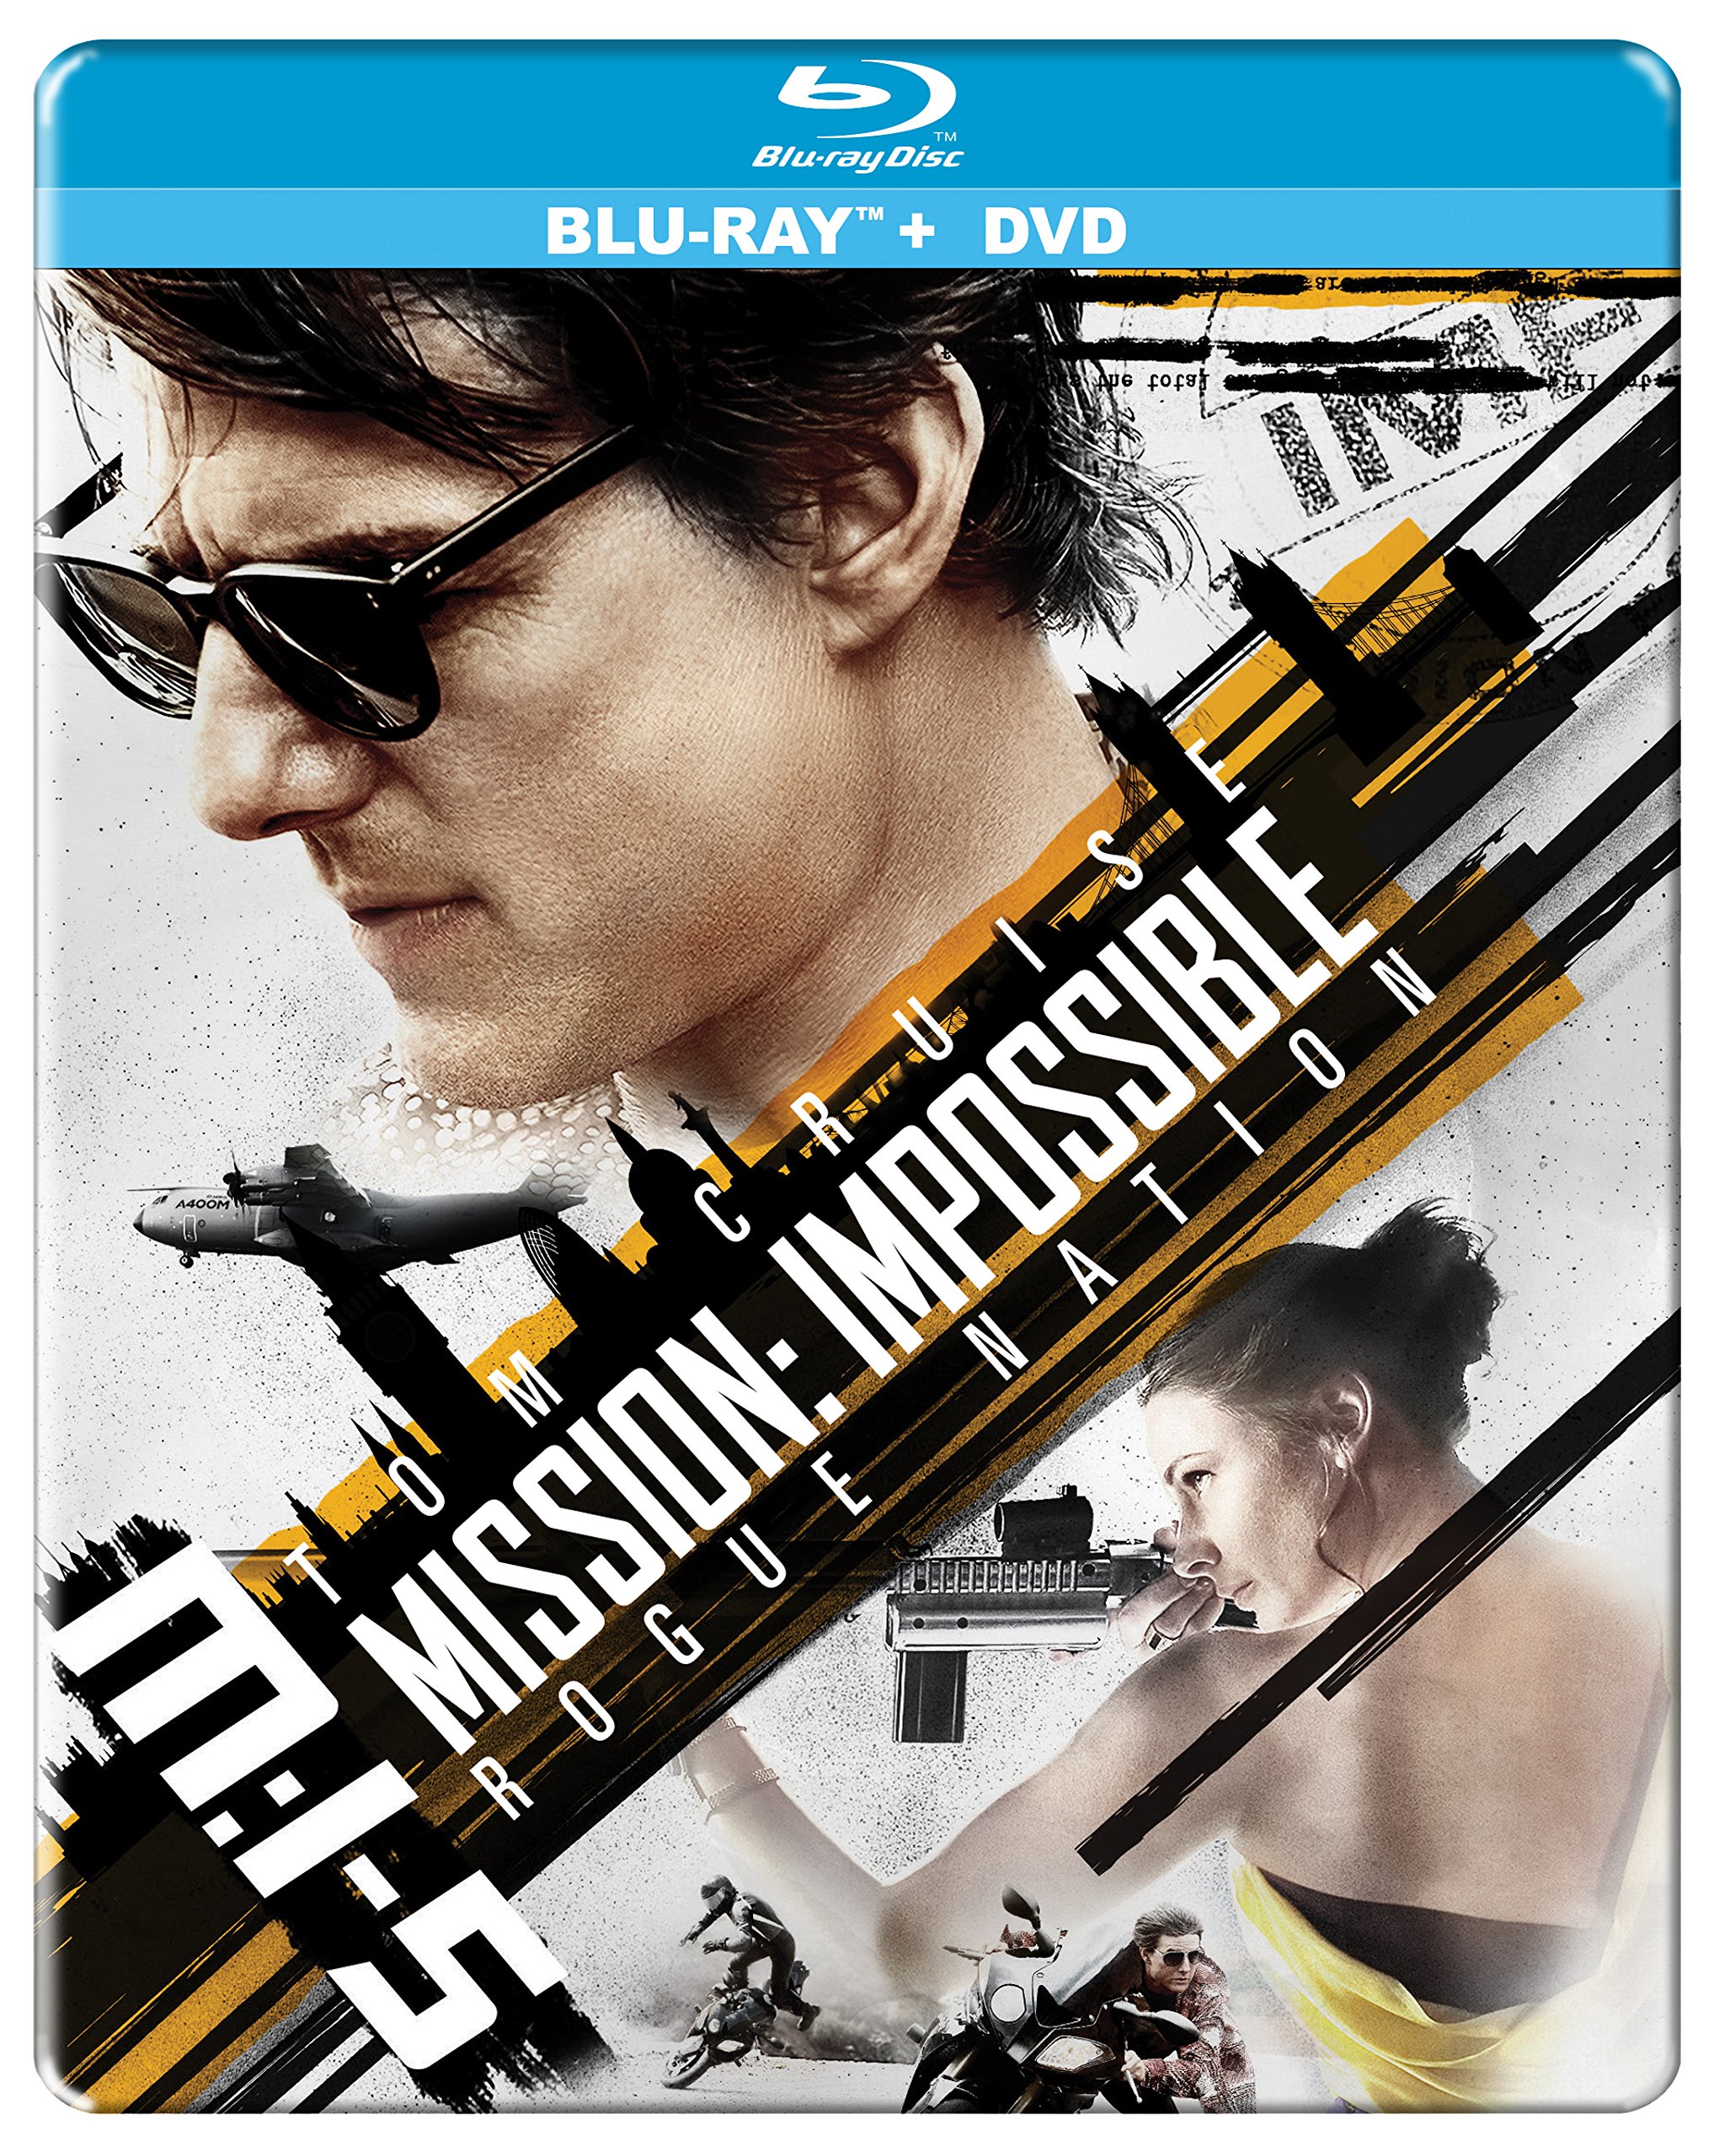 mission-impossible-5-rogue-nation-steelbook-movie-purchase-or-wat